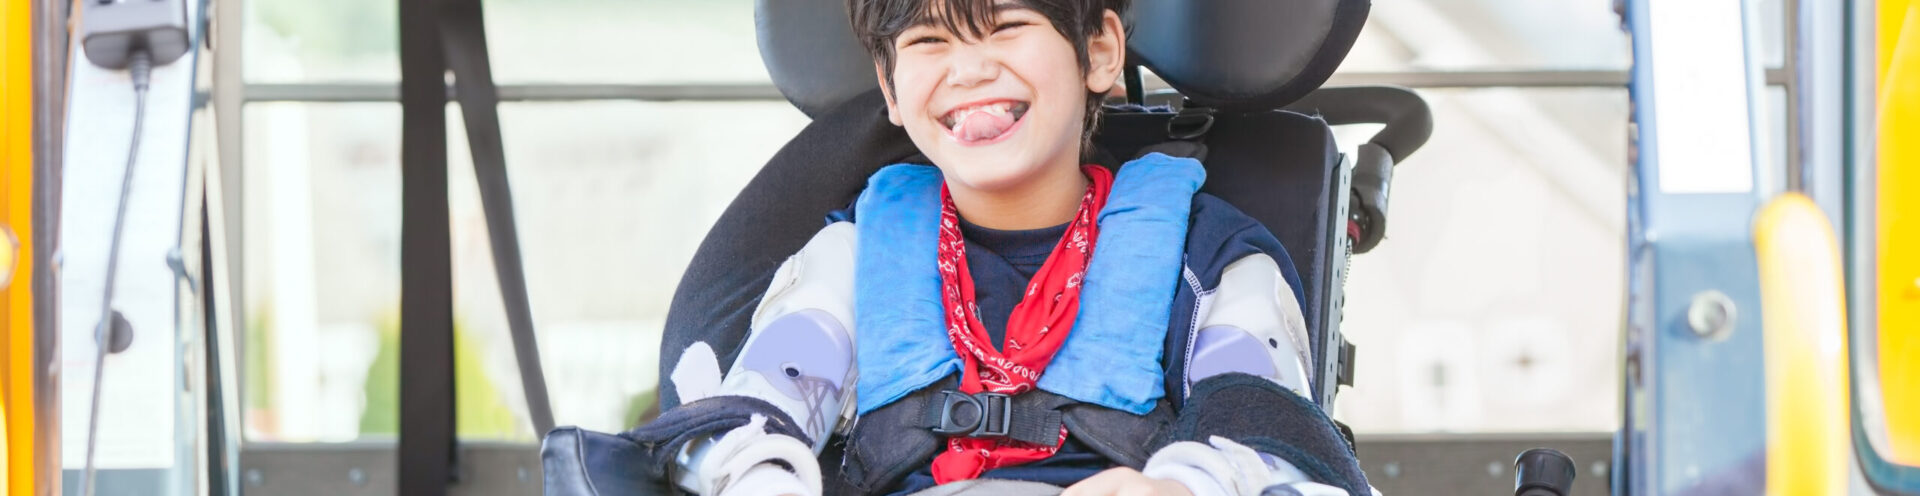 Happy biracial little boy with special needs sitting in wheelchair, riding on yellow school bus lift, going to school